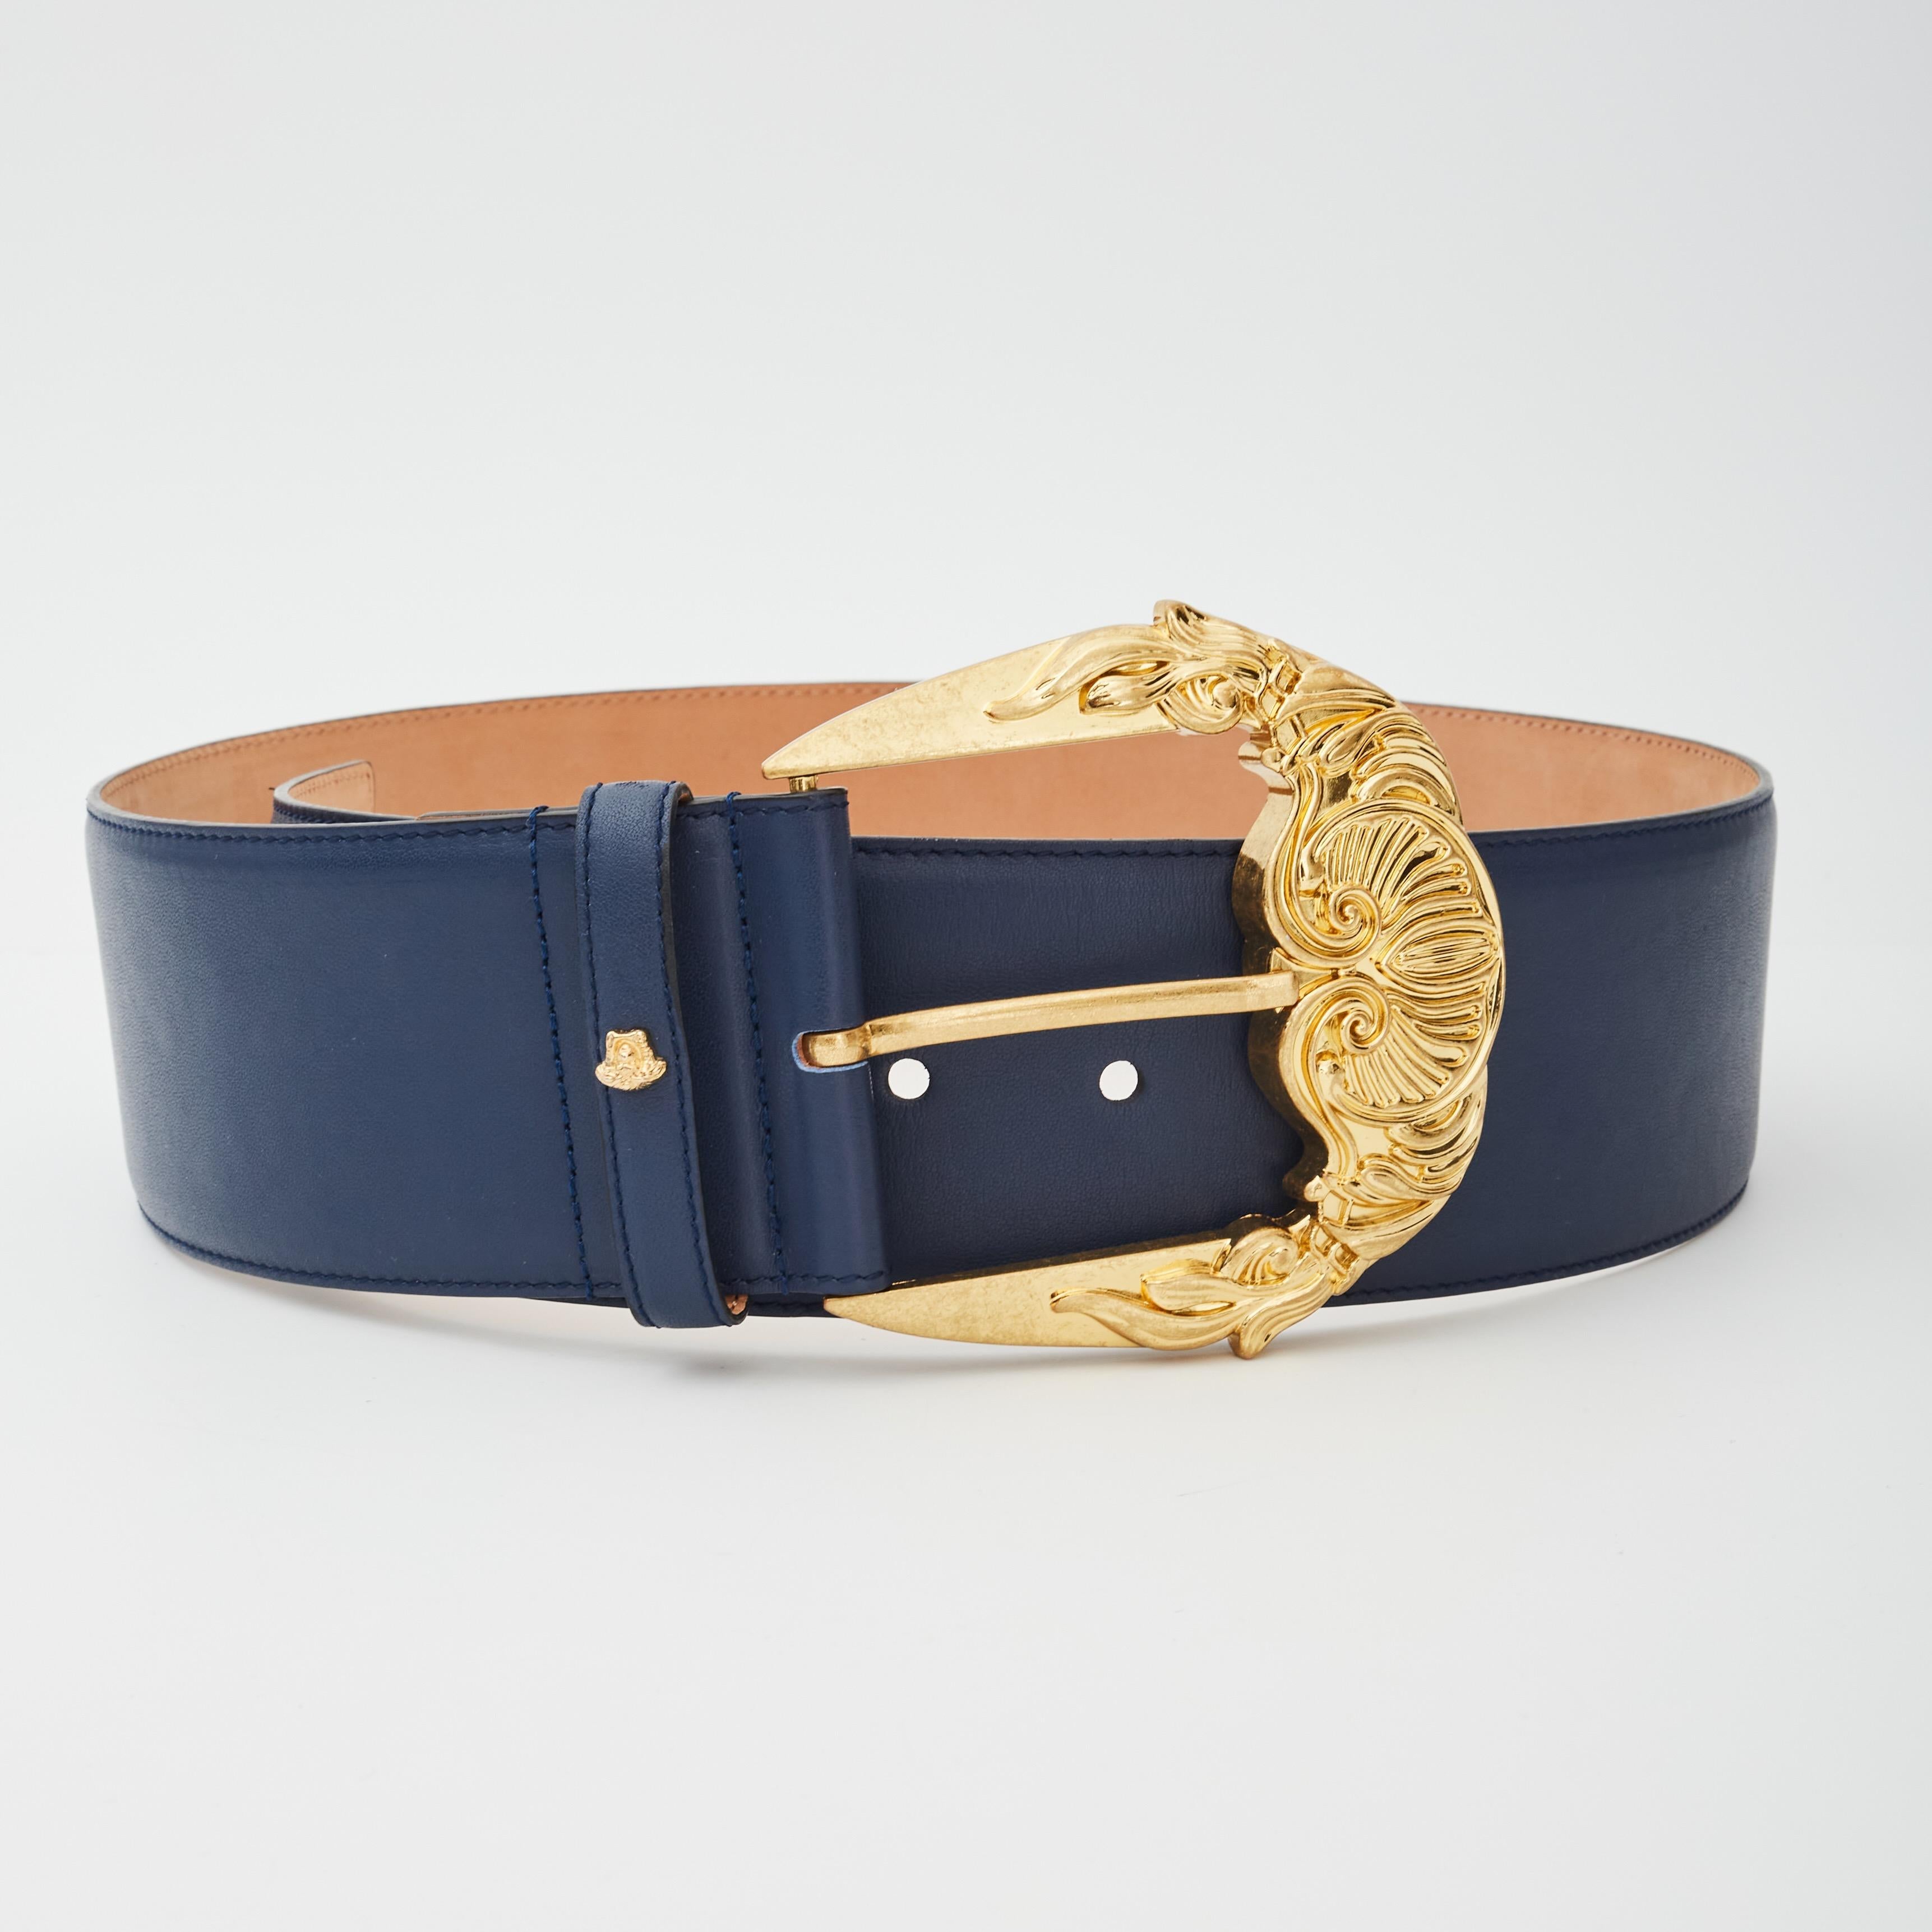 COLOR: Navy with gold buckle
MATERIAL: Leather
MEASURES: L 36.5” x W 1.75”
SIZE: 85 cm / 34 inch
COMES WITH: Dust bag
CONDITION: Good - pristine. Was handled but like new.

Made in Italy